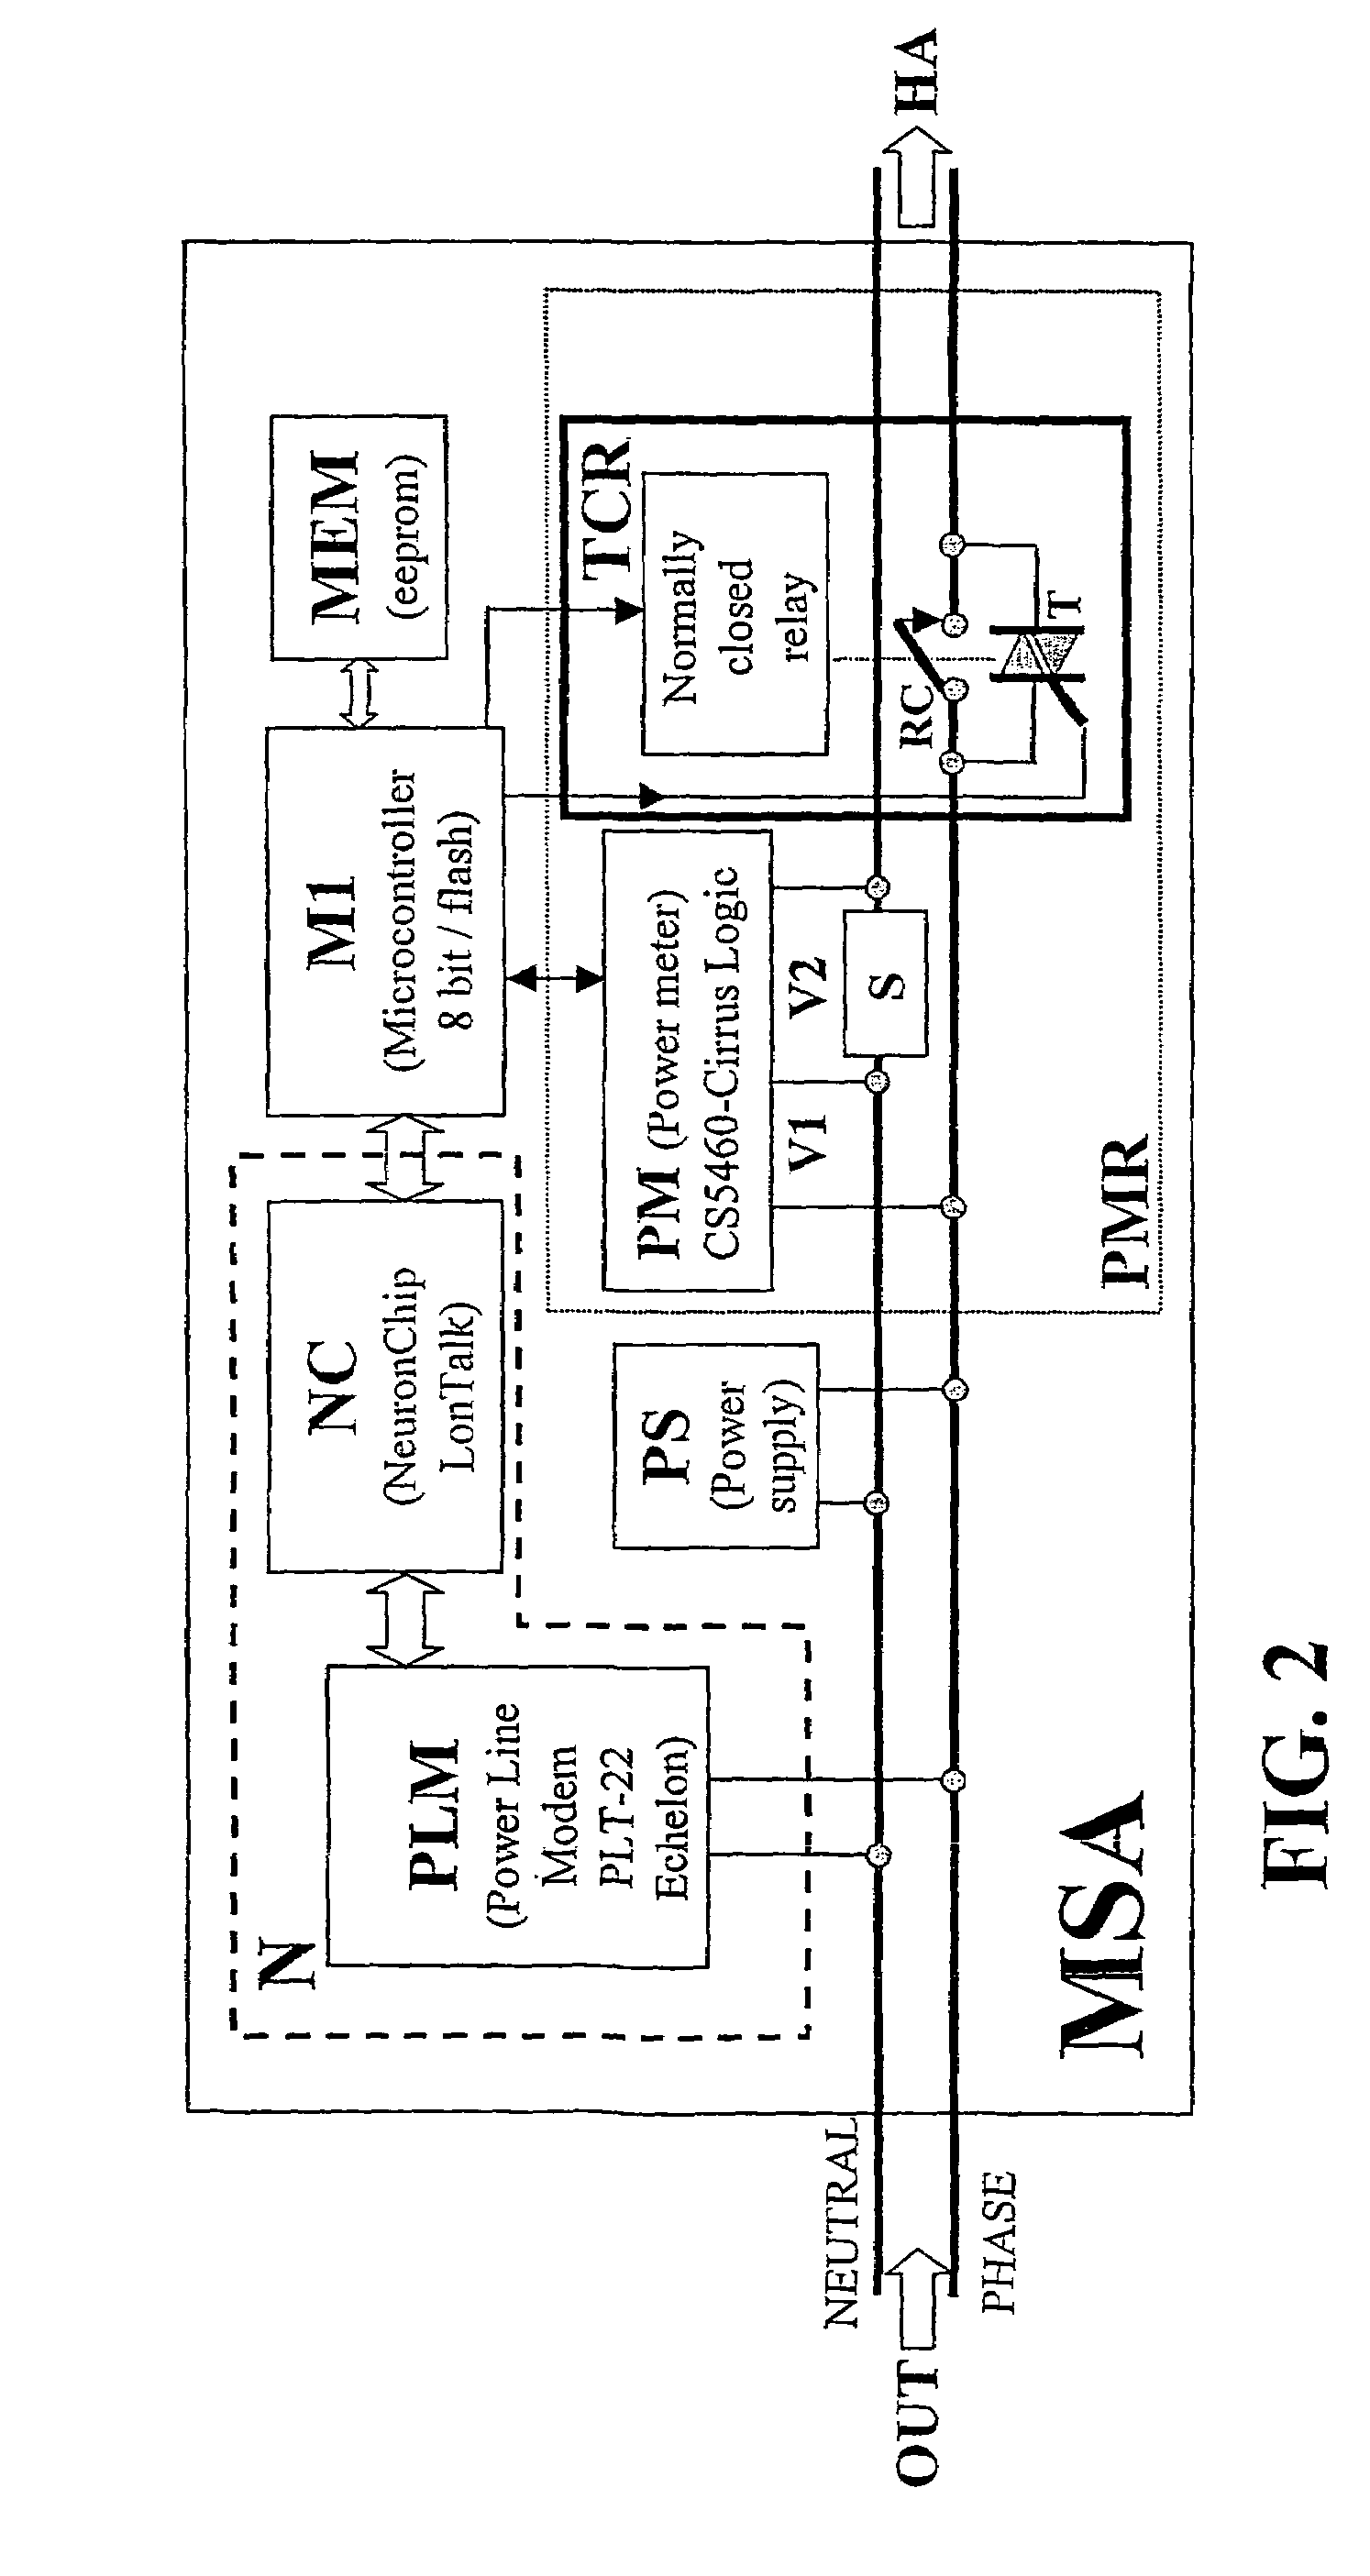 System and device for monitoring at least one household electric user, in particular a household appliance